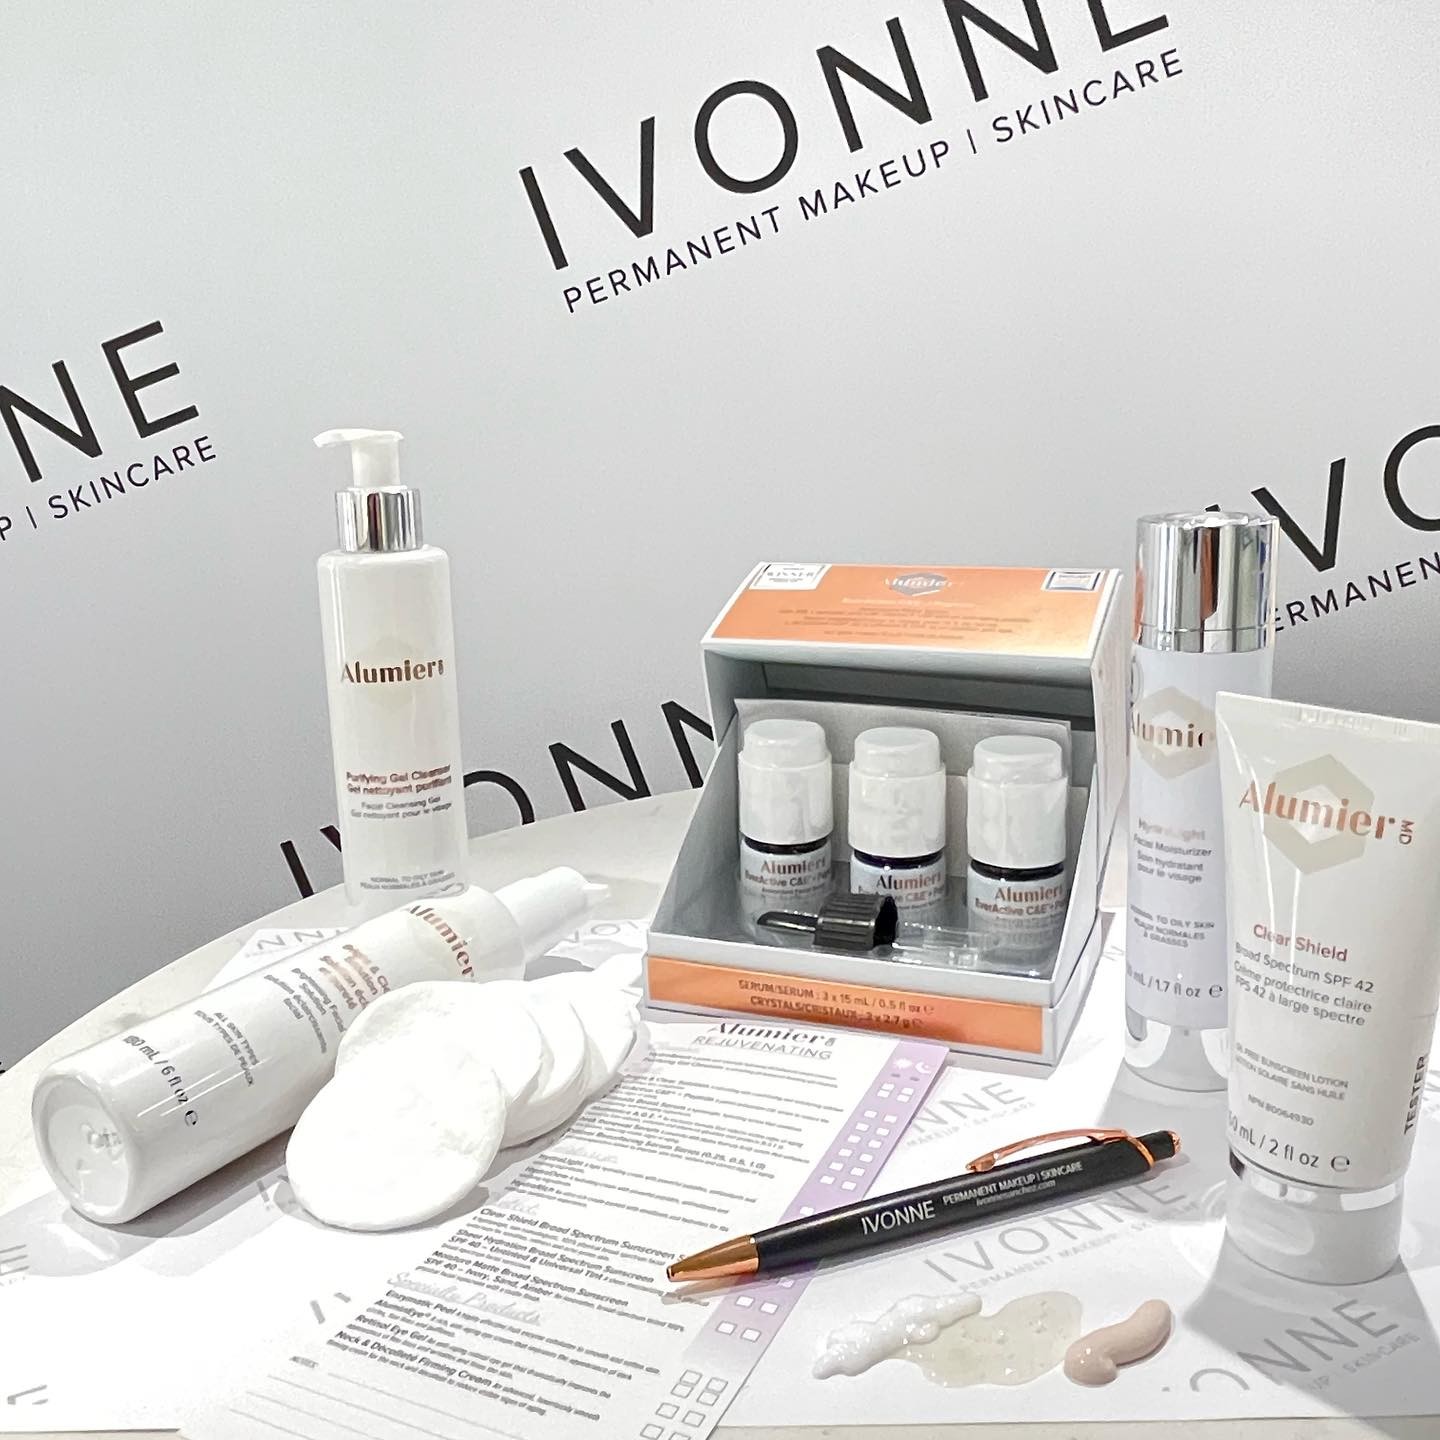 AlumierMD Skincare products at IVONNE